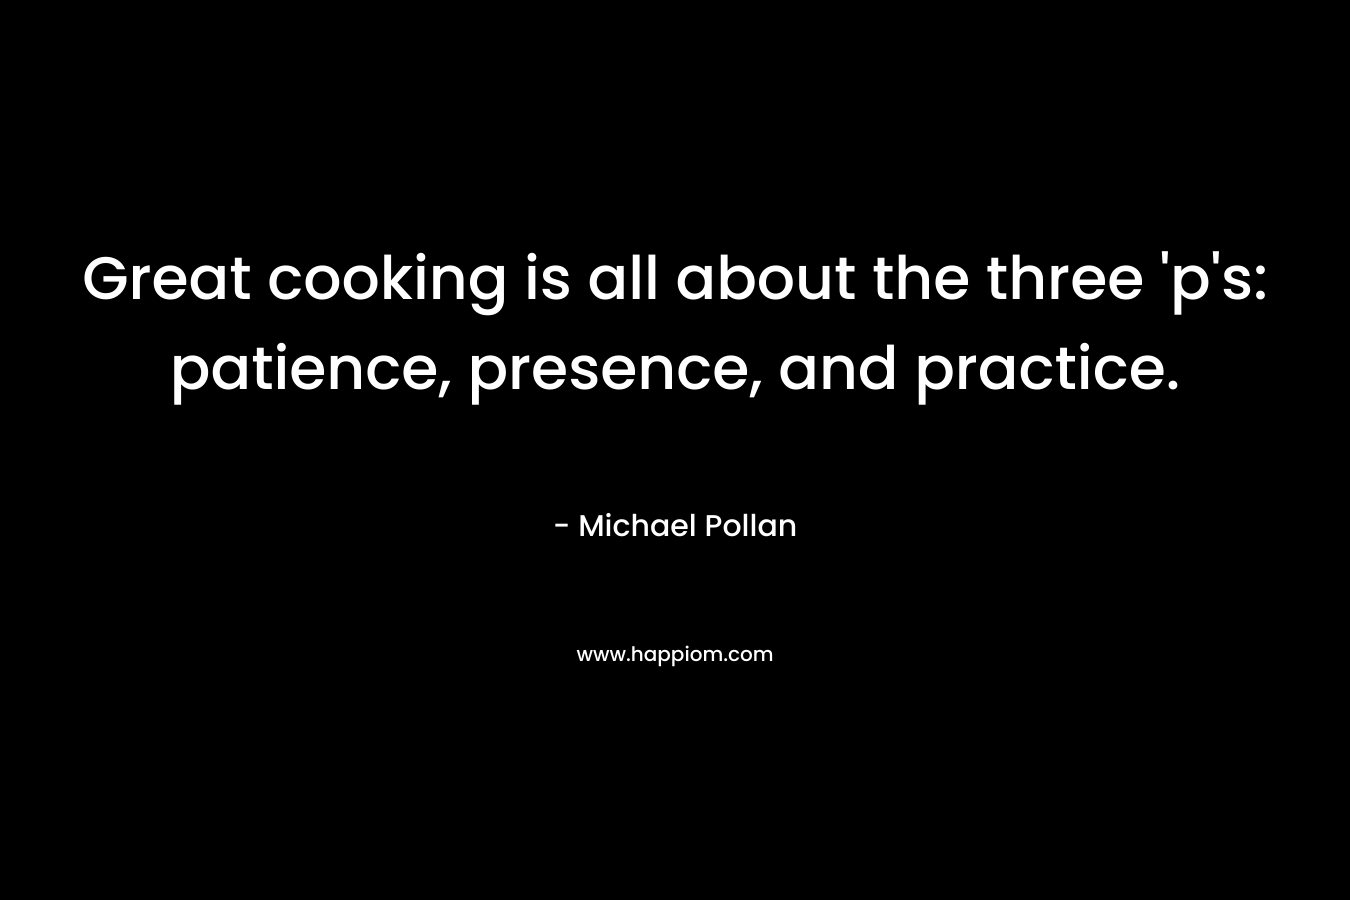 Great cooking is all about the three 'p's: patience, presence, and practice.